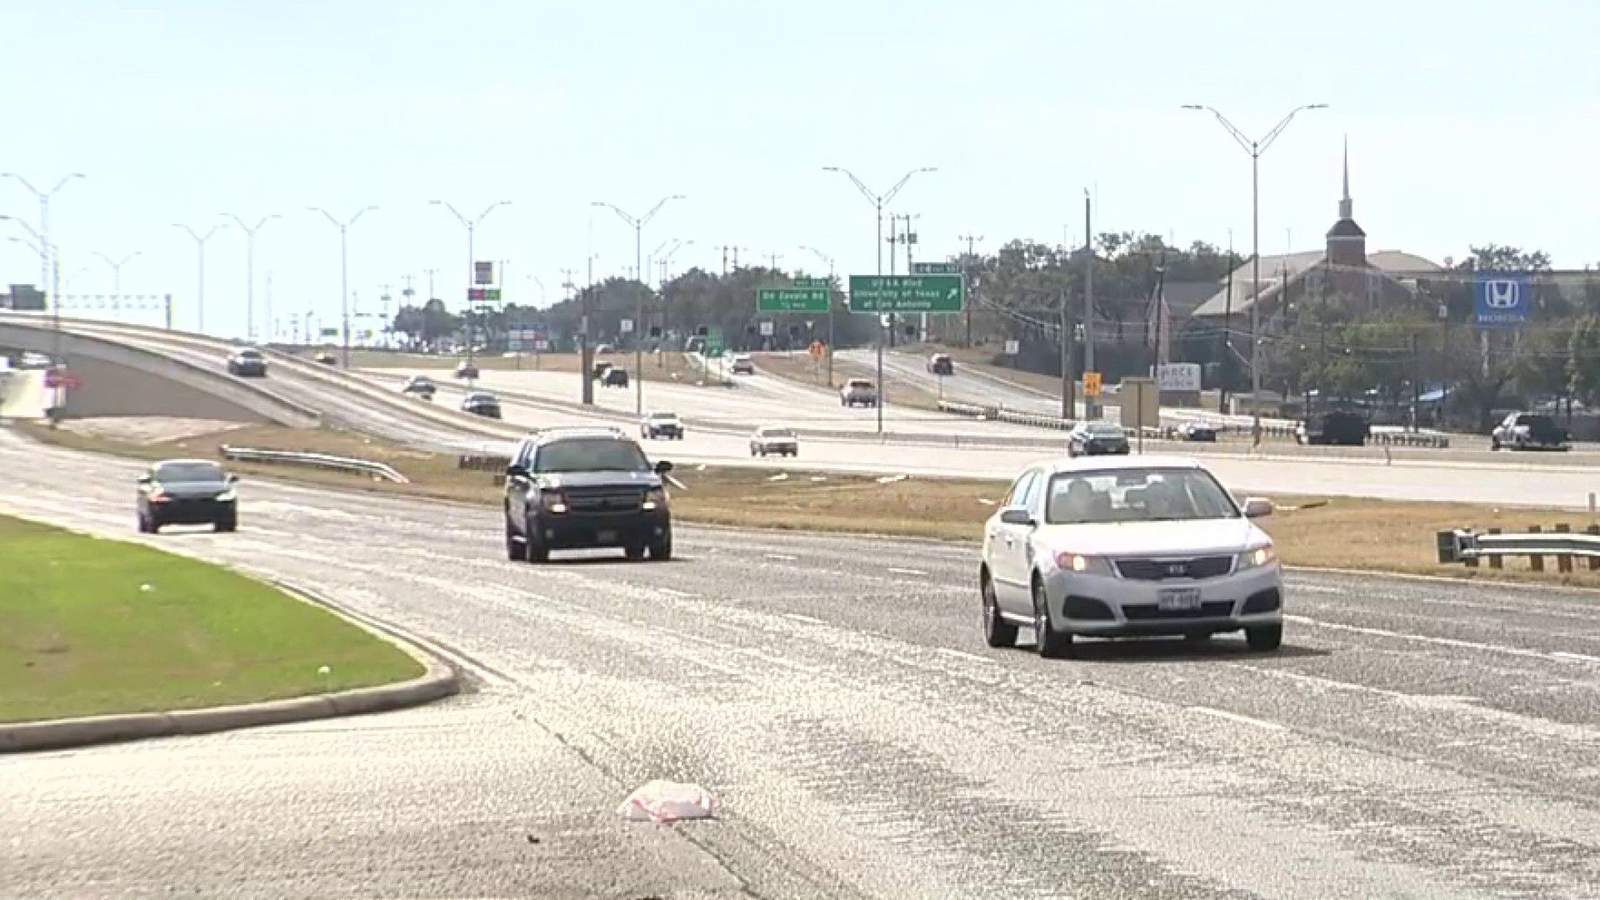 San Antonio’s highways close when the freezing cold starts to rain, city officials say